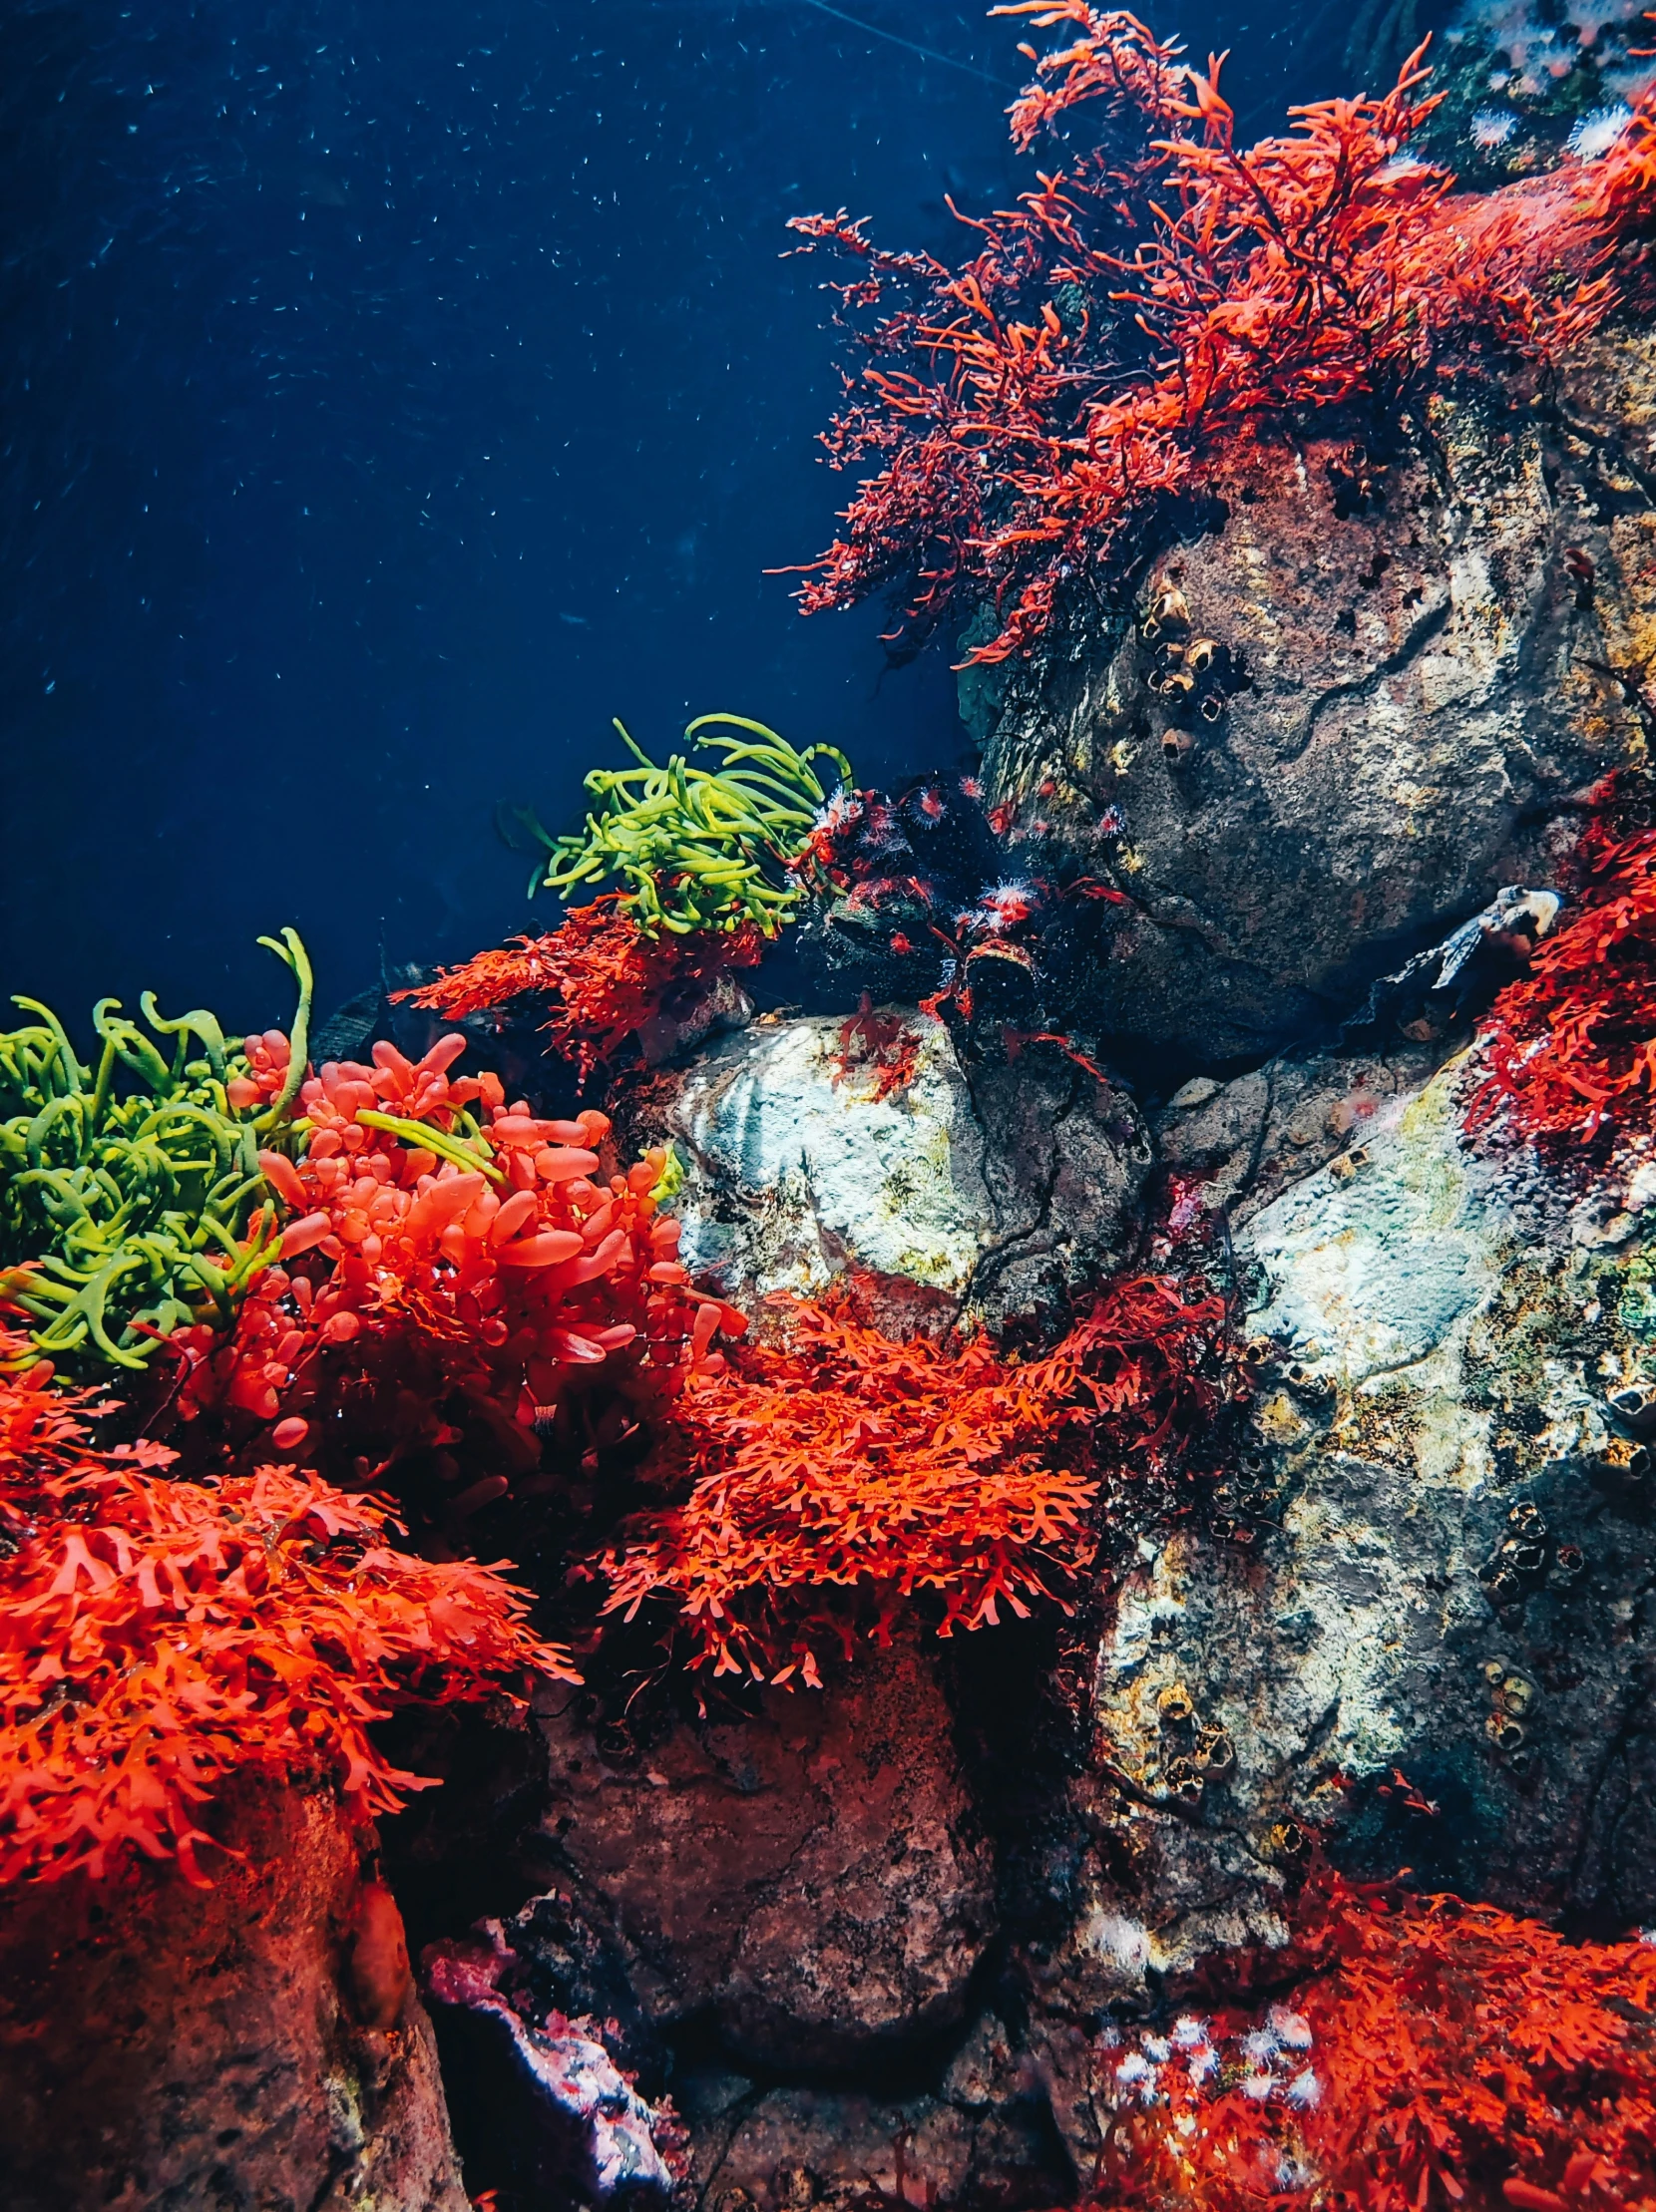 the coral in a sea - bottomed area is full of coral